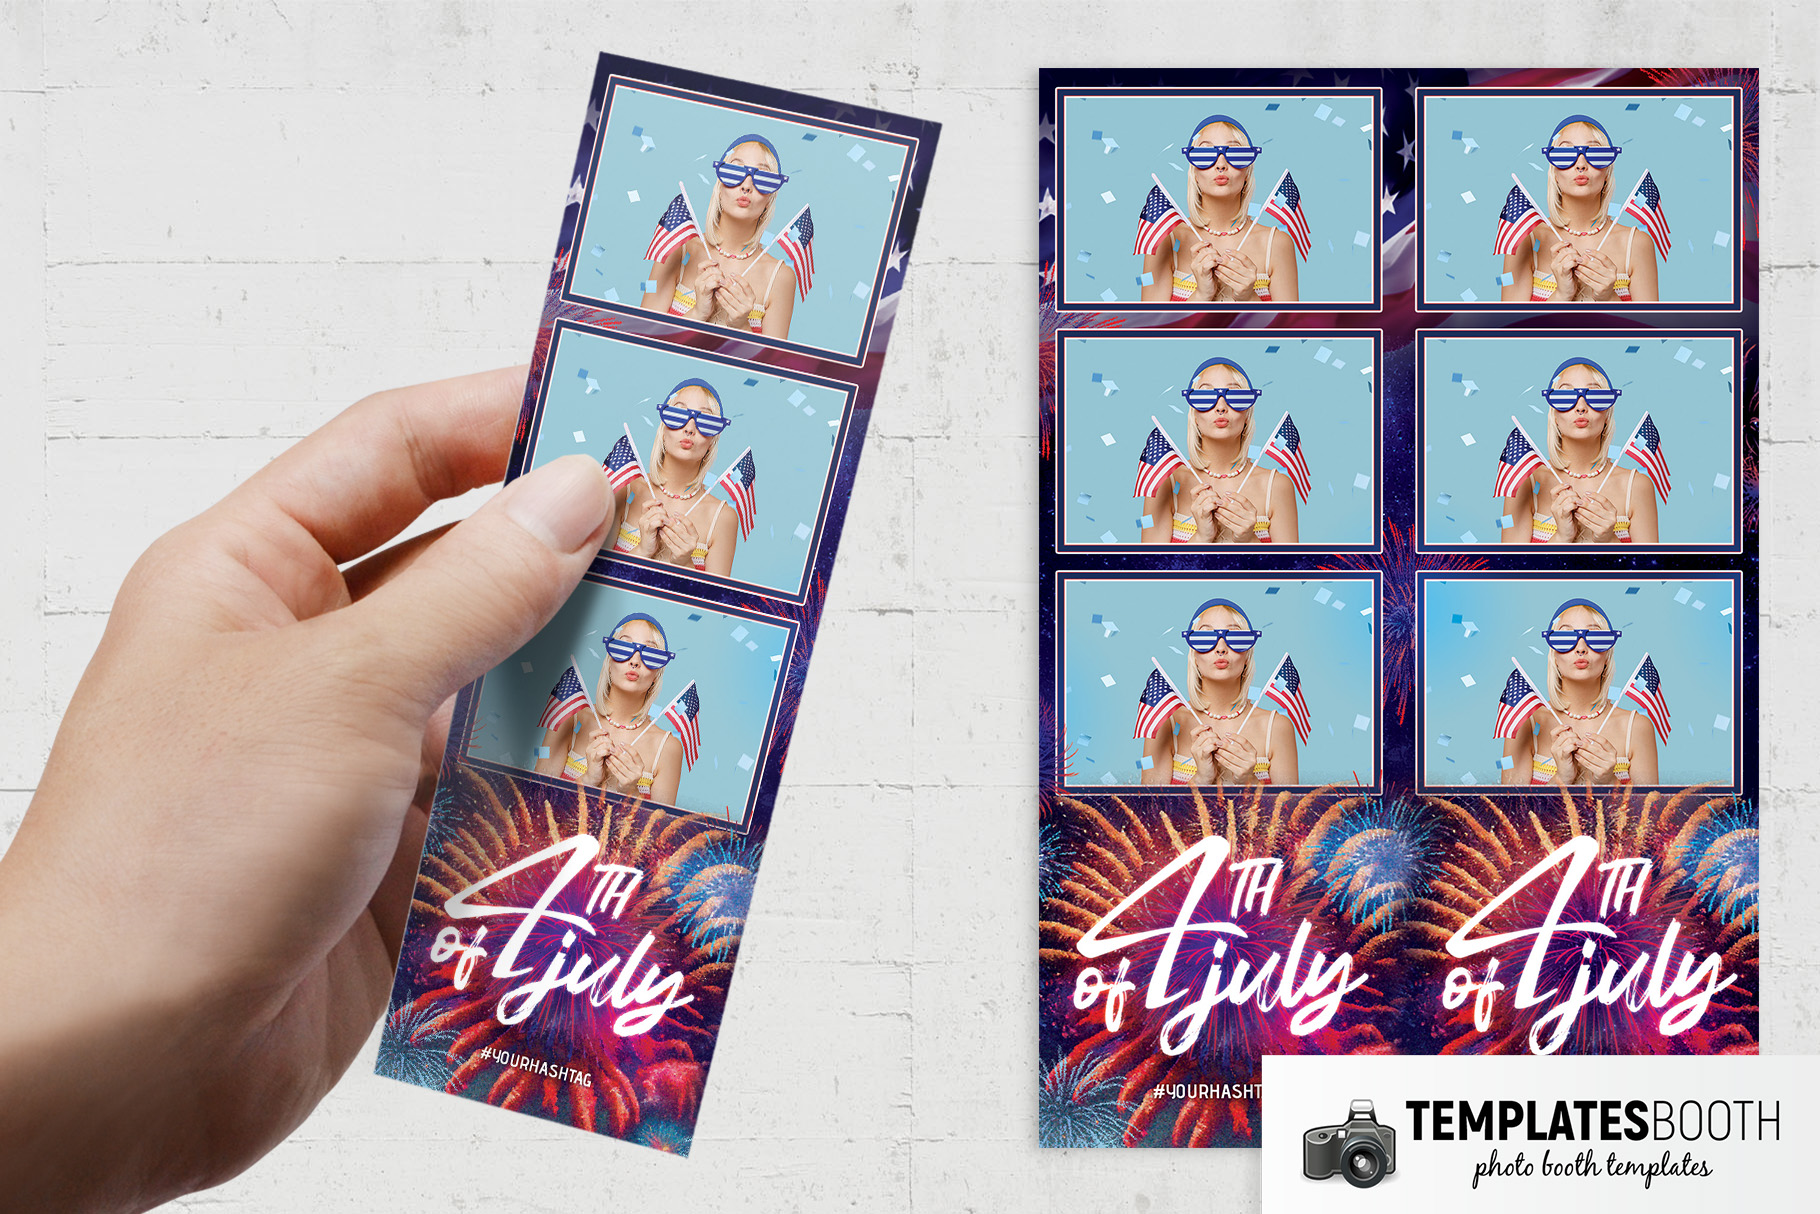 4th July Fireworks Photo Booth Template